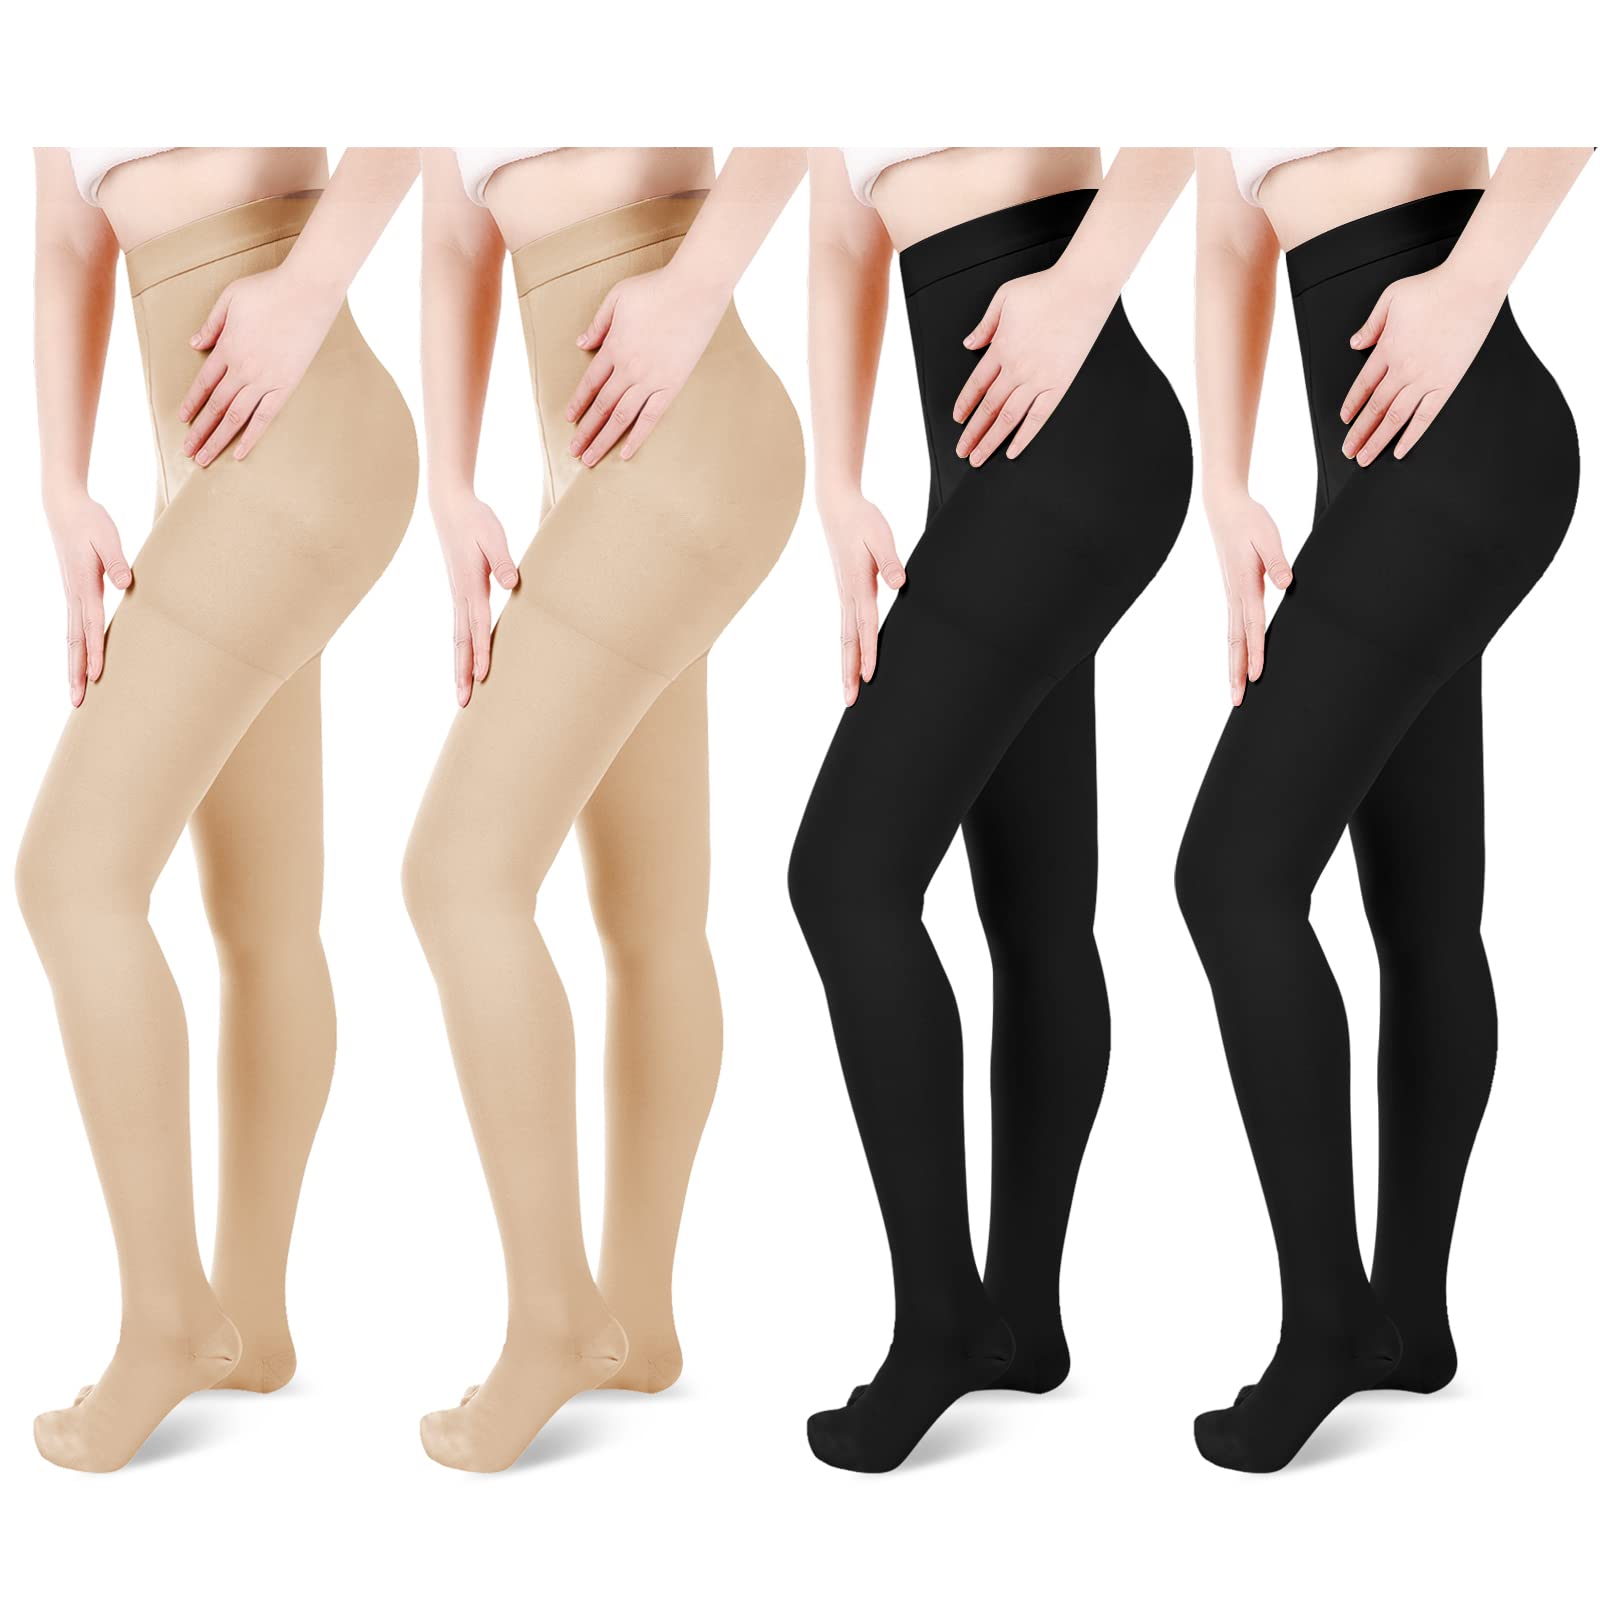  Plus Size Compression Tights for Women Circulation 20-30mmHg -  Graduated Support Stockings with Open Toe for Varicose Veins, Arthritis,  Edema, Embolism - Purple, 4X-Large - A214PR7 : Health & Household